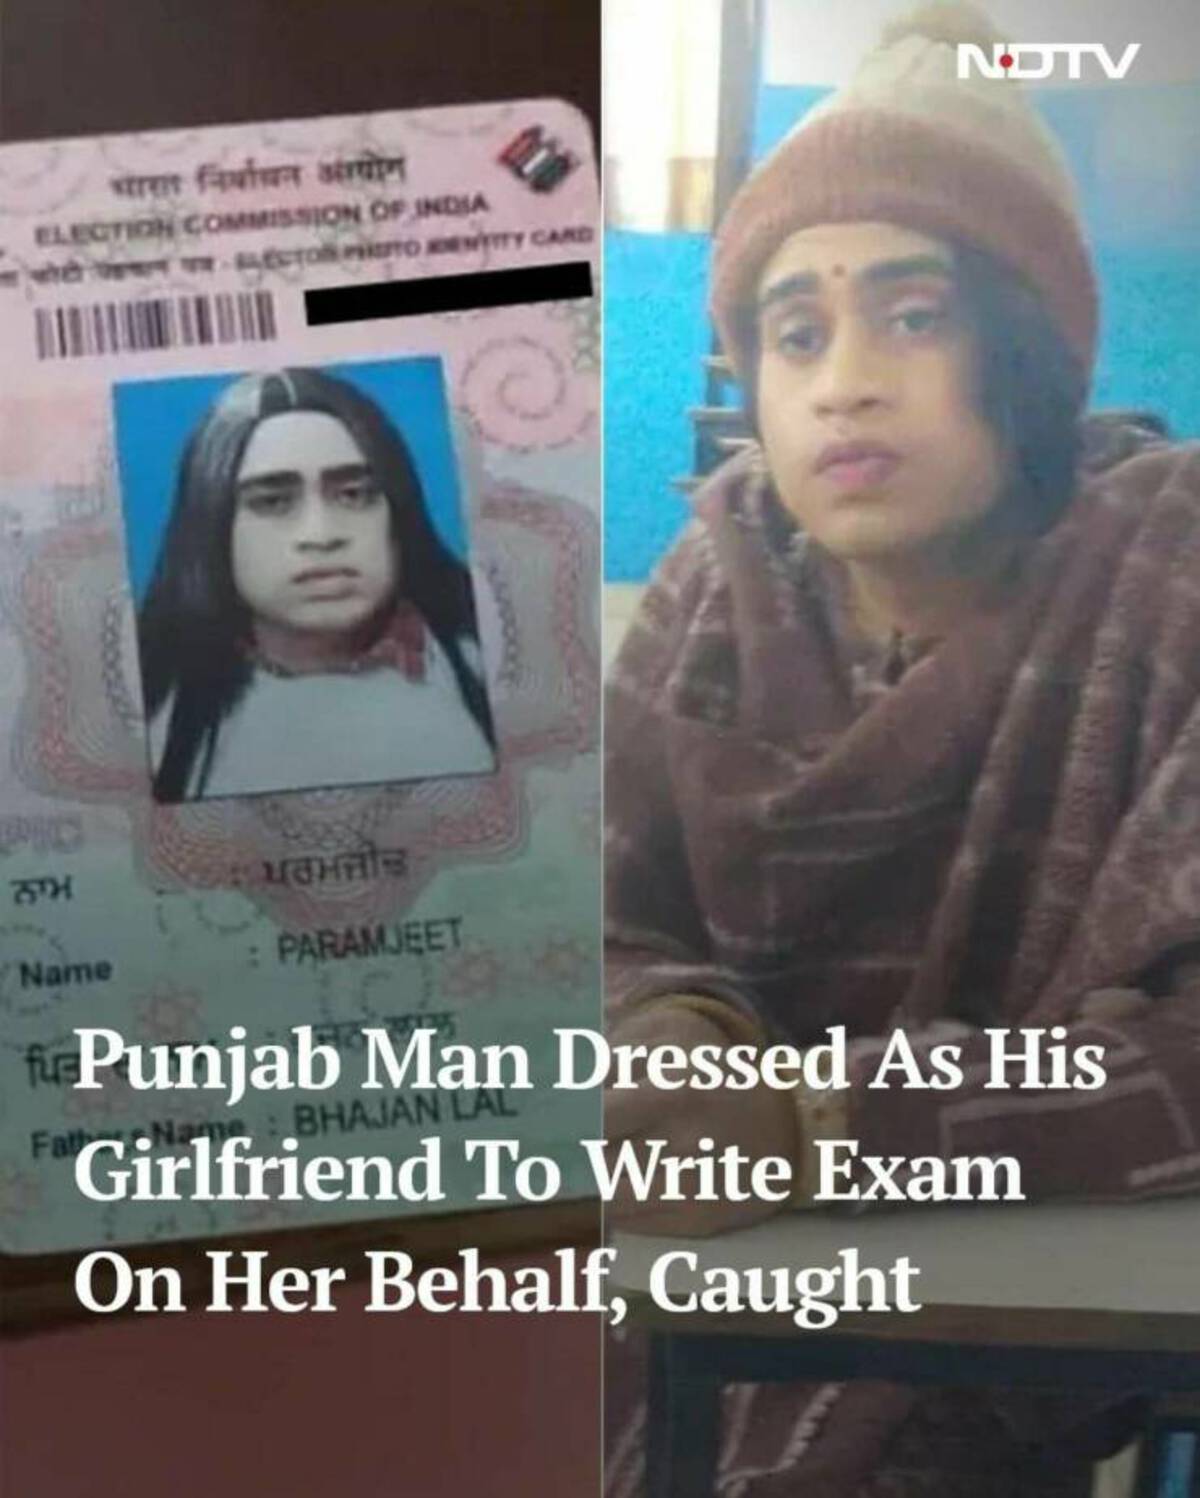 rock & roll hall of fame - Election Commission Of India Name Sector To Entity Card Paramjeet Supocke Ndtv fur Punjab Man Dressed As His Fall Name Bhajan Lal Girlfriend To Write Exam On Her Behalf, Caught